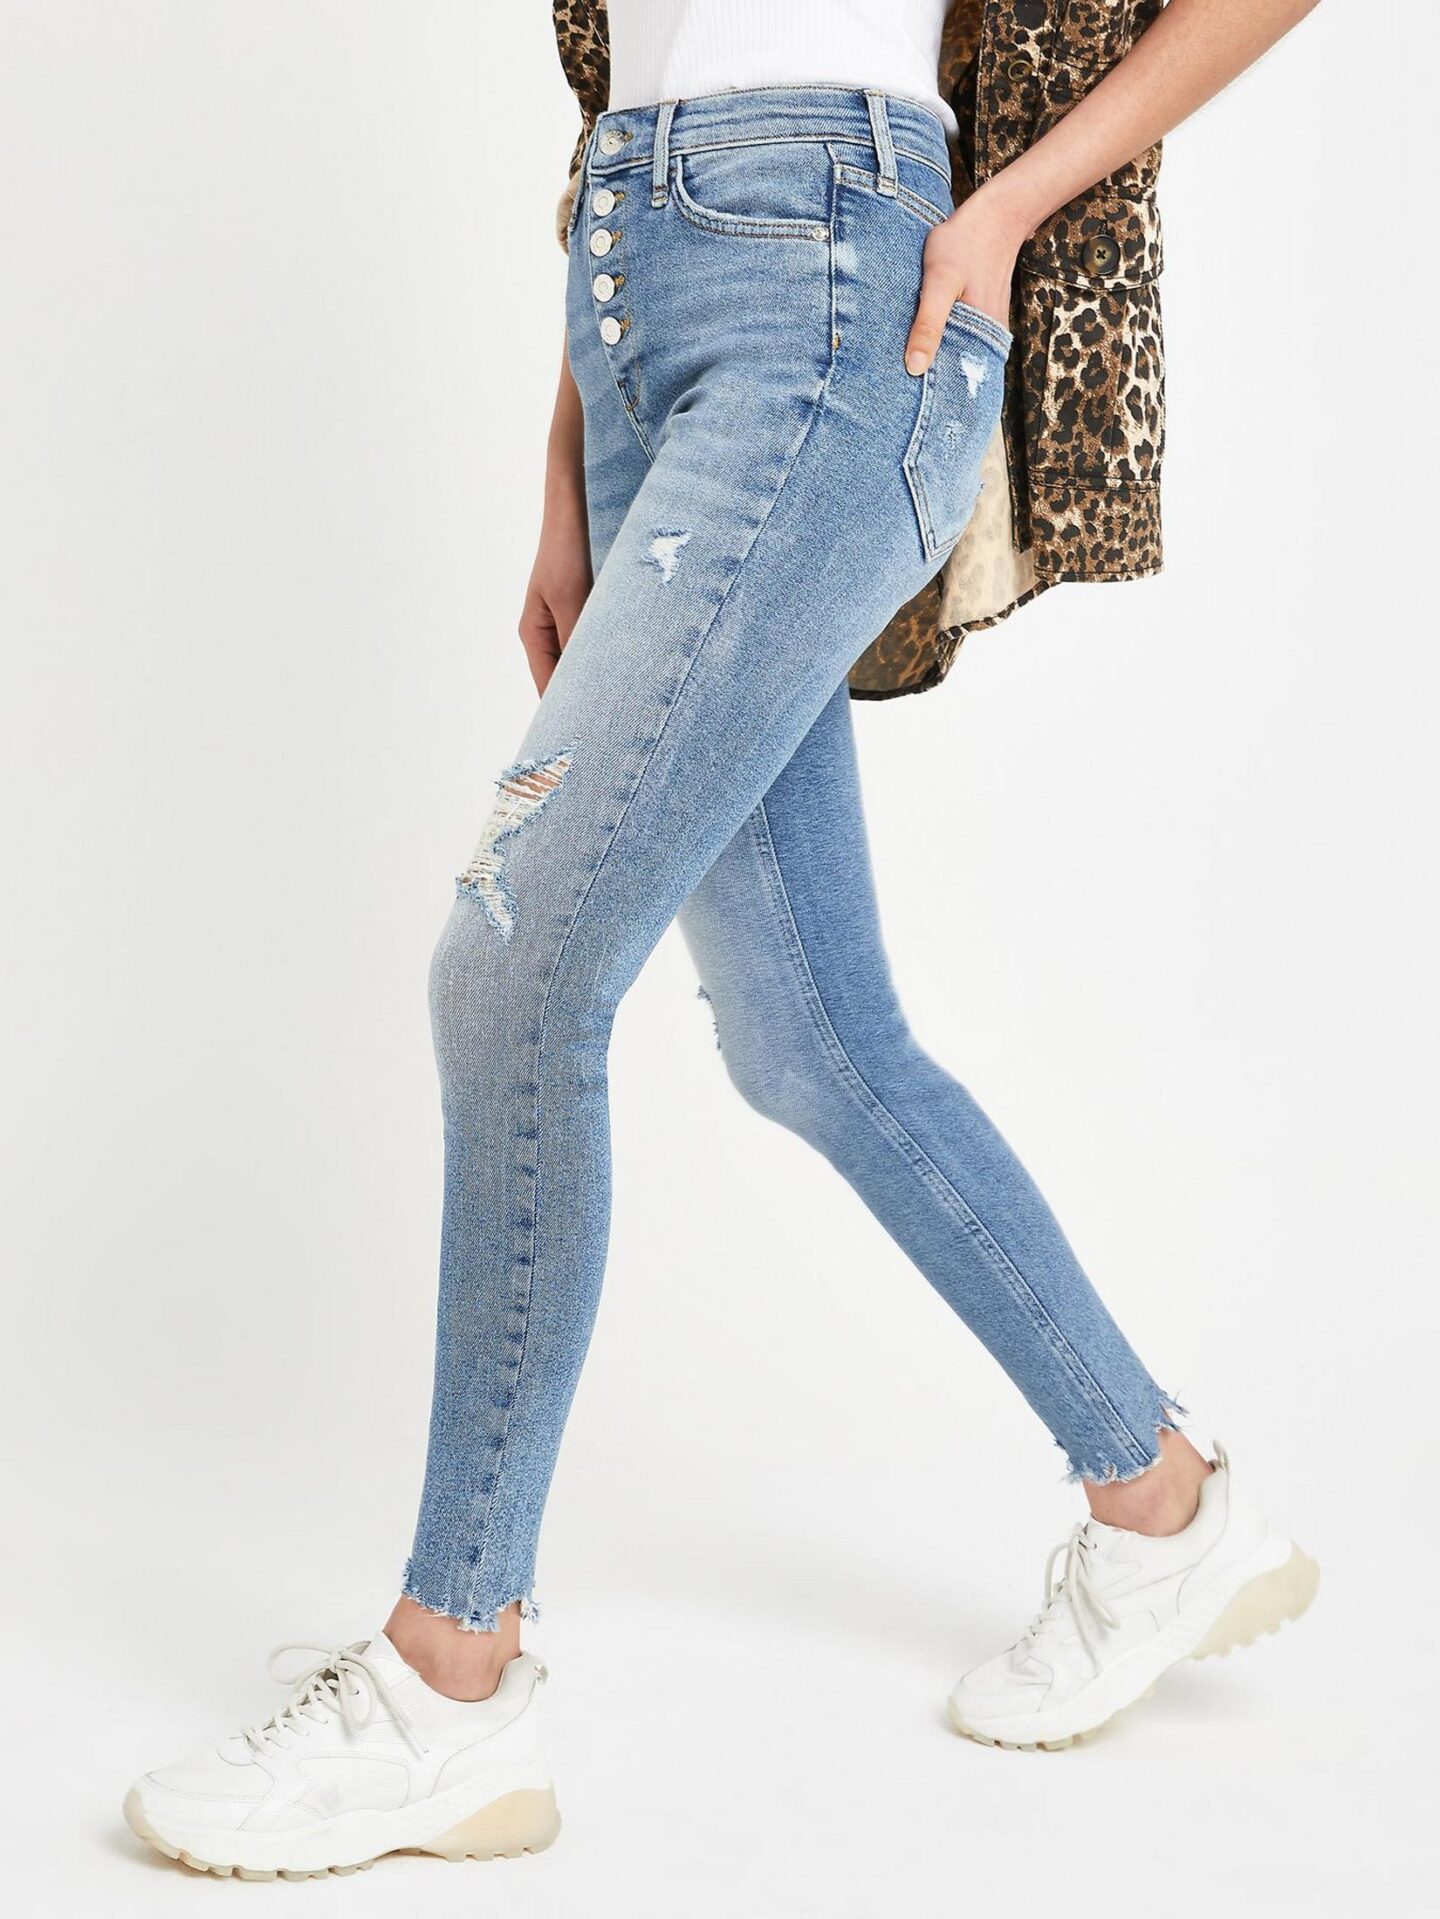 Styling Mom Jeans And High Waisted Skinnies Ford La Femme